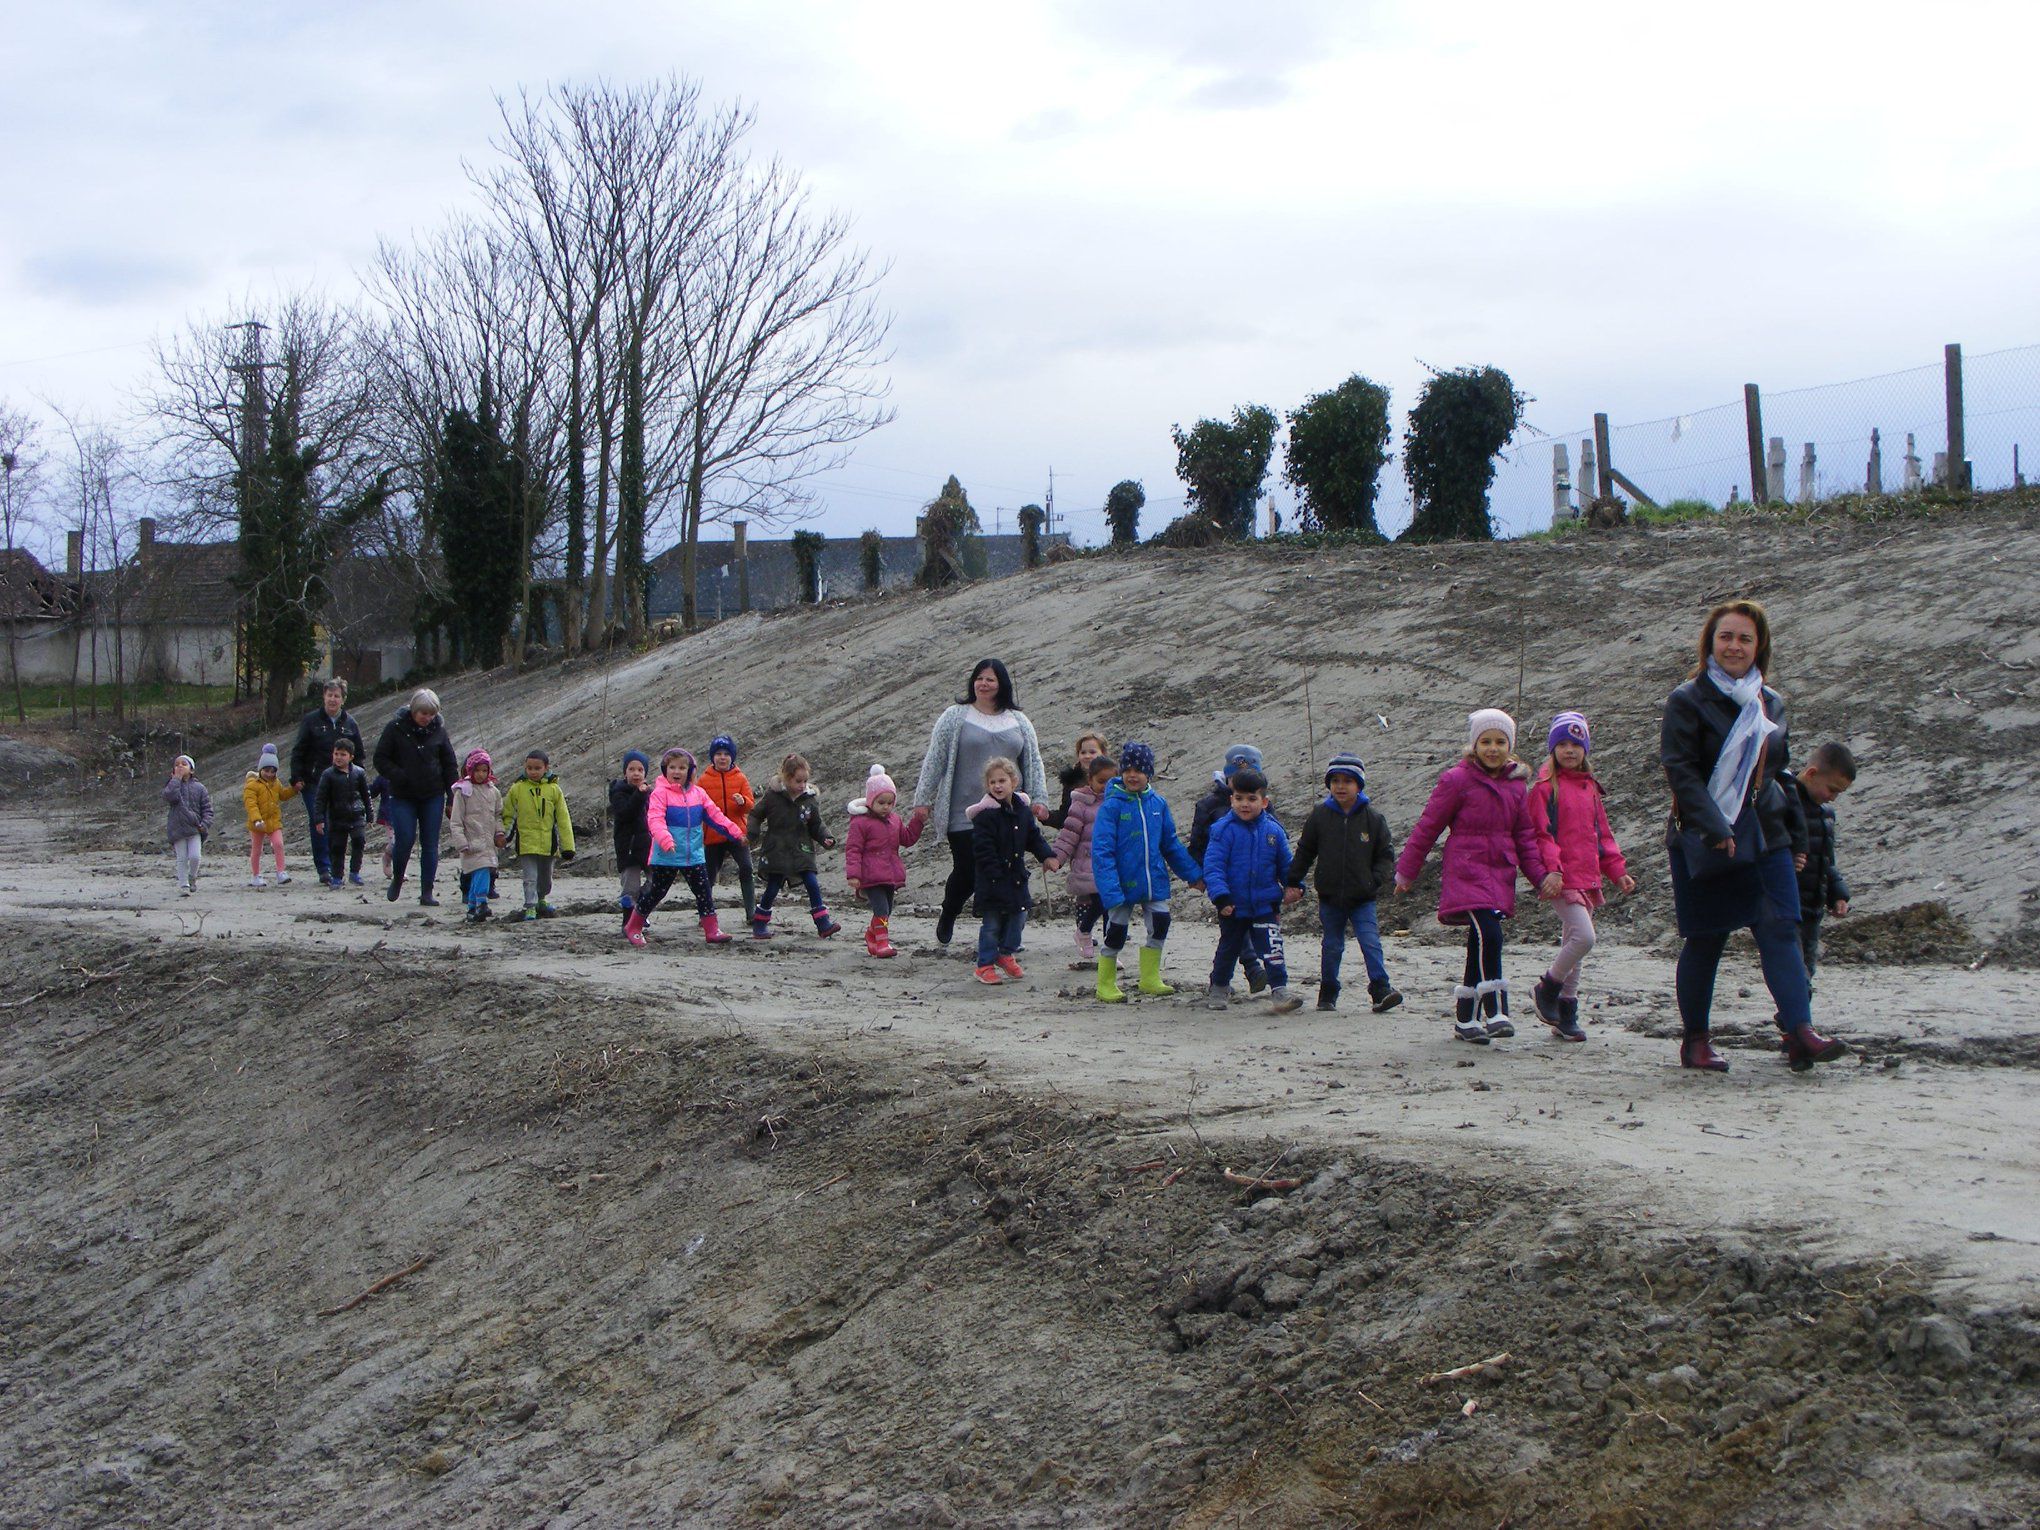 The local primary school students also came to help with the planting